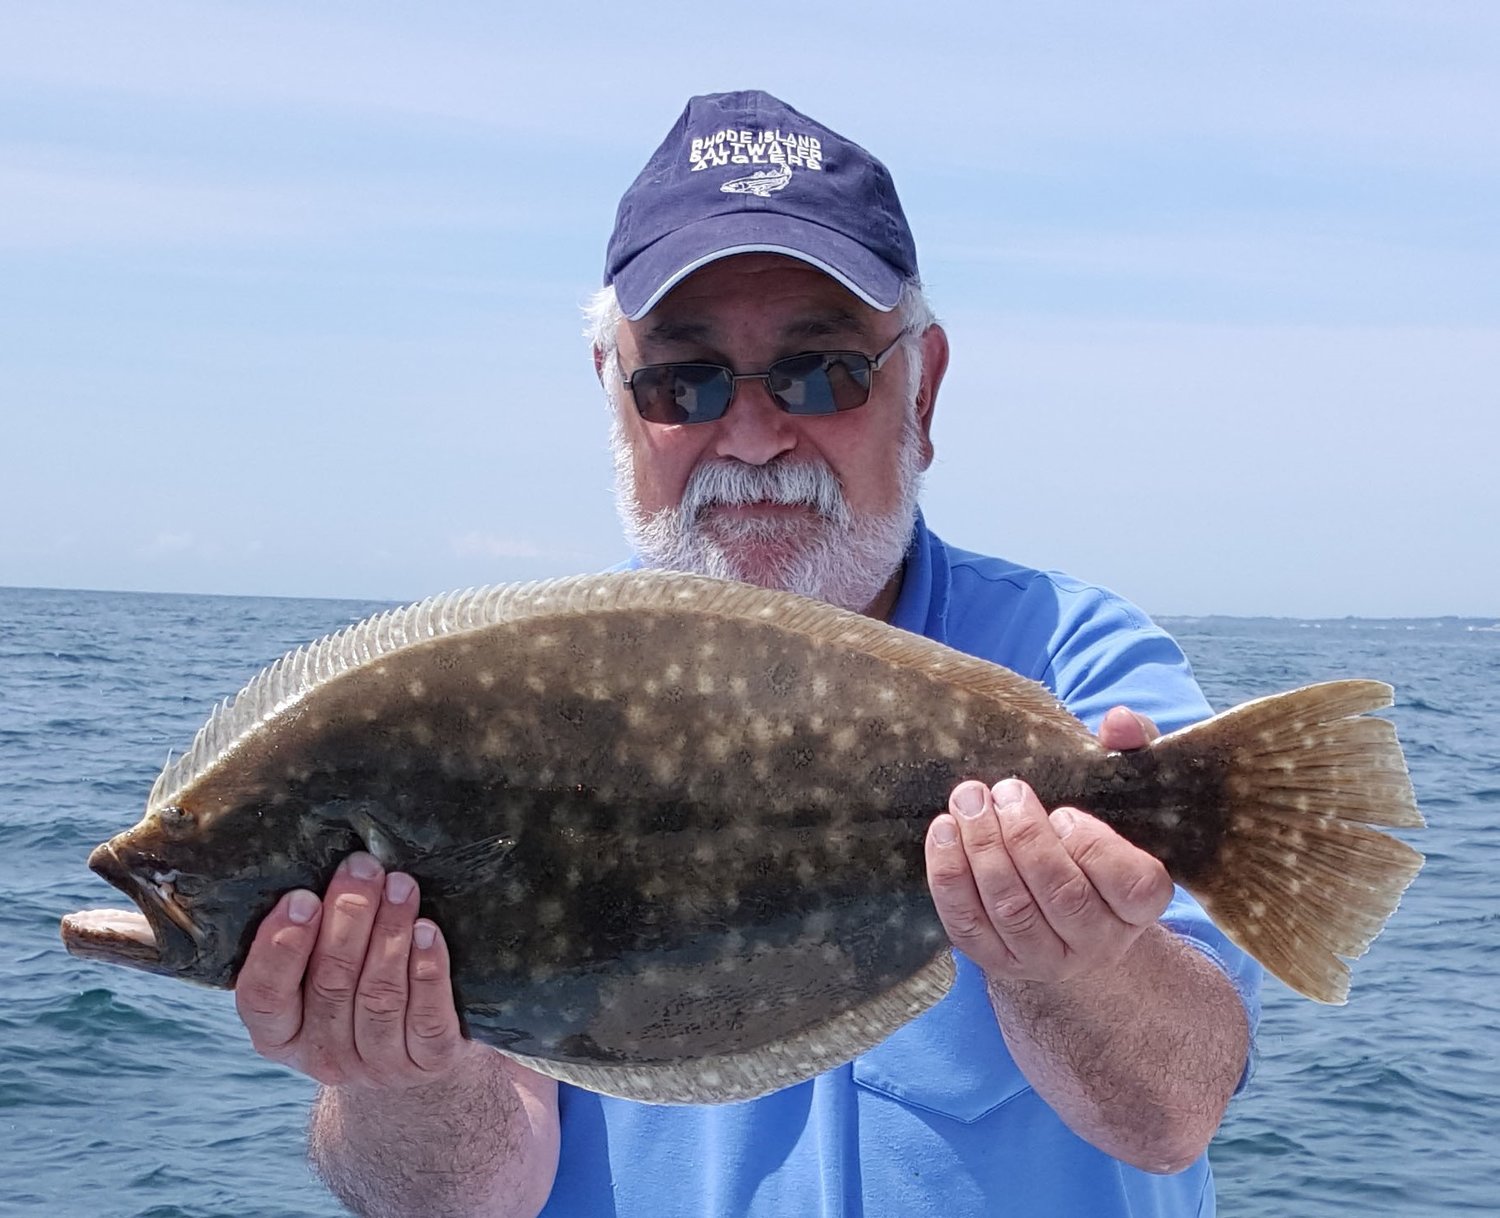 Steve Medeiros, president of the RI Saltwater Anglers Association said, “Electronic recording may help us grow fisheries… so there are more fish in the water for us to catch, eat and/or release.”